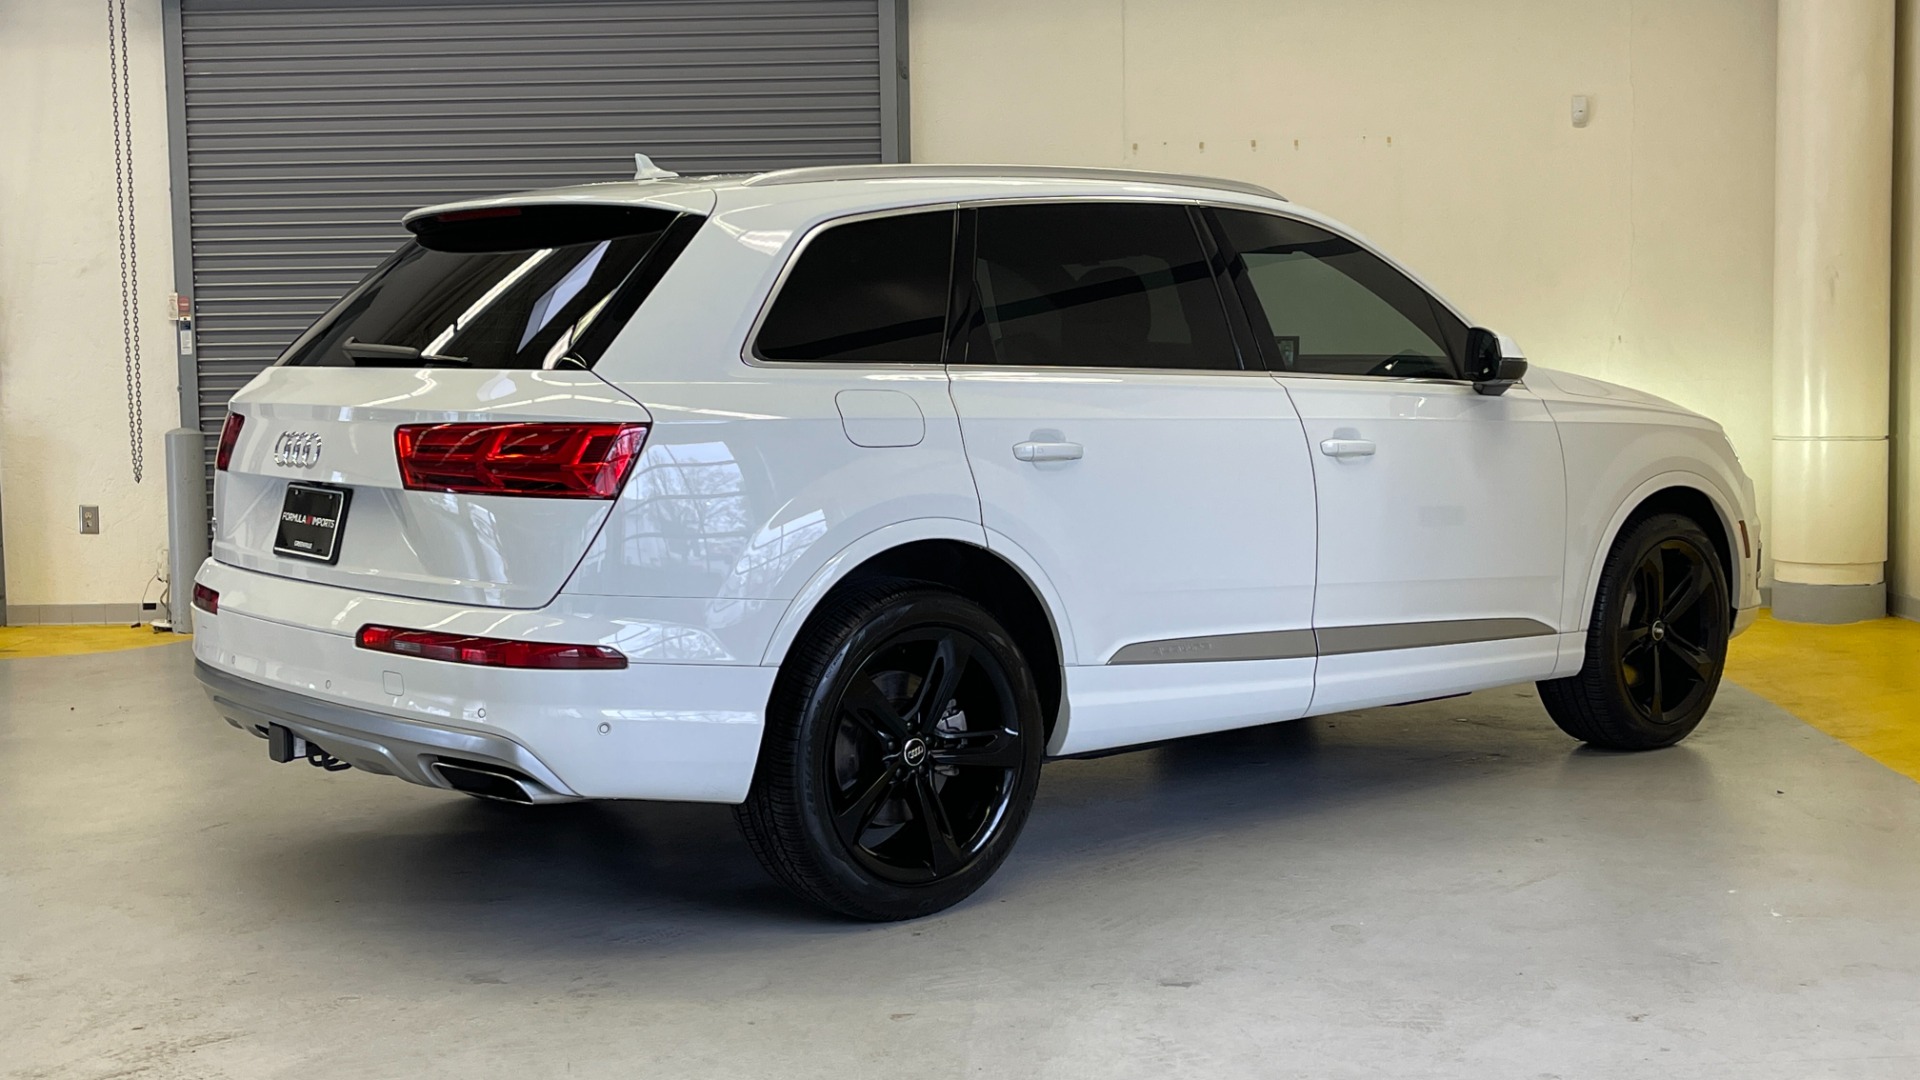 Used 2019 Audi Q7 PRESTIGE / NAV / SUNROOF / LANE ASST / TOWING / 21-IN WHLS / REA for sale $50,995 at Formula Imports in Charlotte NC 28227 6